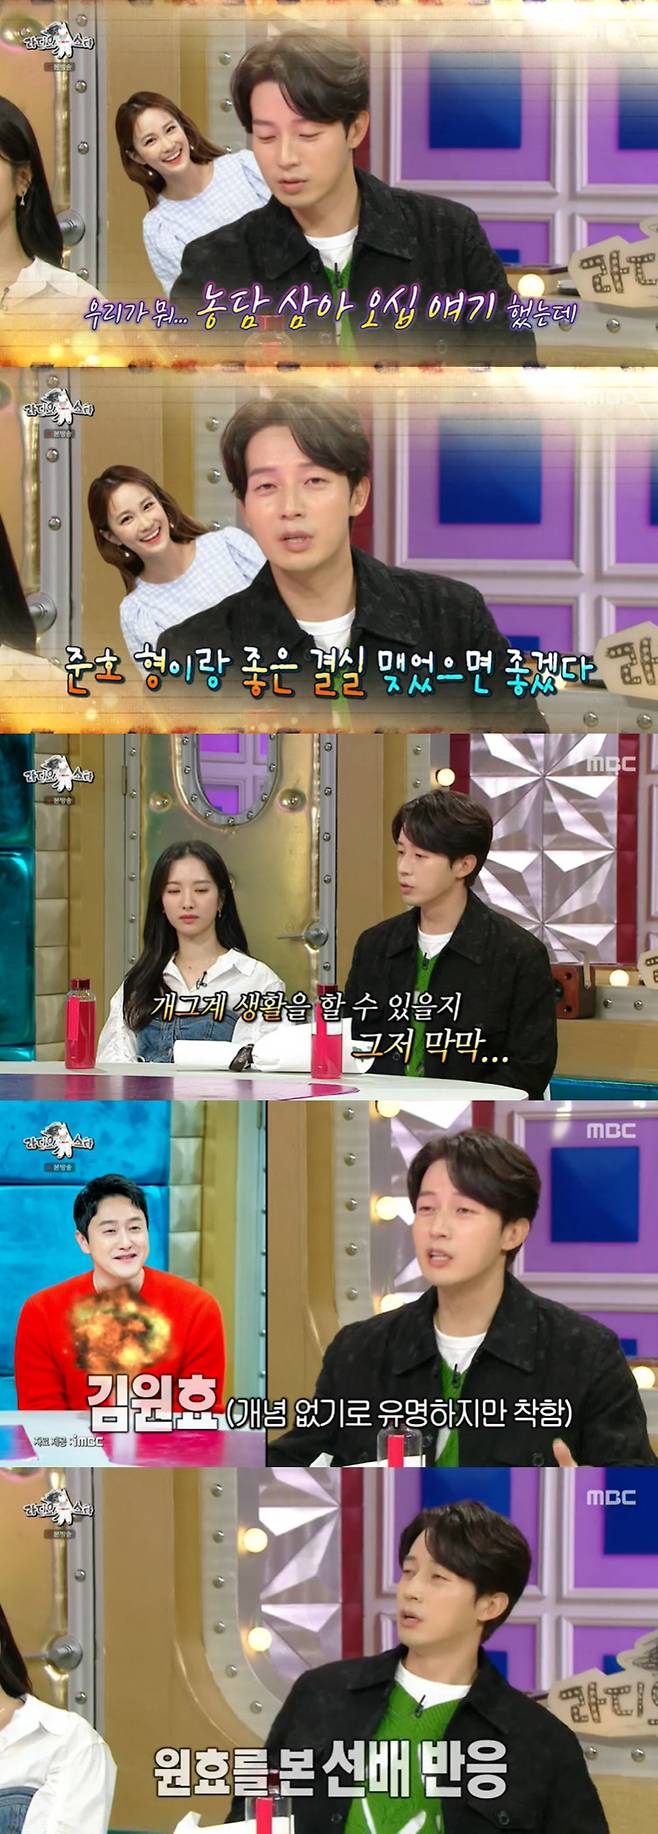 Radio Star Yoon Eun-hye has revealed his position on the ongoing love line with Kim Jong-kook.In MBC entertainment program Radio Star broadcasted on the 27th, Myeong Se-bin, Yoon Eun-hye, Bona, Heo Kyoung-hwan appeared as guests.Yoon Eun-hye has become a first love image in the 2000s with hits such as Palace, Coffee Prince 1st Store and Grapefield Man.Yoon Eun-hye praised the acting of Bona, a junior space girl who passed on the image of First Love with TVN Twenty Five Twinty One.Yoon Eun-hye said, I thought it was a big hit if it was my first work because I was so good, but it turned out that the foundation was solid.I dont cry that much in my drama. I mean, Im like myself. I made my debut.Even if I was criticized at that time, I remembered that I had overcome silently for my family. Yoon Eun-hye is an indispensable love line with Kim Jong-kook.Yoon Eun-hye and Kim Jong-kook formed a love line in SBS entertainment program X-Men 17 years ago.Kim Jong-kooks ear-blocking scene in the X-Men corner Of course game is still being talked about as a legend.Yoon Eun-hye said of the situation at the time, It became like a triangle with Lee Min Ki, and Lee Min Ki came out too seriously.I felt like I was really taking me away, he said. At that time, my brother blocked my ears and wanted to stop my ears.I wanted to be a genius, he recalled.Yoo Jae-Suk still mentions Yoon Eun-hye in Running Man.Yoon Eun-hye has never appeared on the air, but there is a 40-minute collection of Yoon Eun-hye on YouTube.Yoon Eun-hye said: My brother Park Jae-seok sometimes talks about me on Running Man: What do you do when you play?I also talked about me, he said. So I called Park Jae-seok, my first words were Im sorry. I said it was okay, so Ill talk to you again next time. Heo Kyoung-hwan, a comedian and successful CEO, said, In the preliminary interview, the artist came when he was 15 billion won (sales) and 35 billion won?I wanted to clean up the assets in this case, he said. I do not include VAT and I am making about 60 billion won in sales. There was another reason Heo Kyoung-hwan appeared on Radio Star.Heo Kyoung-hwan said, Every time Radio Star comes, sales rise by 200%. Recently, it merged with the largest milk kit company in Korea.Now that the scale is so large, I will leave it to a professional manager and I will concentrate on broadcasting. Kim Ji-min, a gagsum colleague of Heo Kyoung-hwan, recently unveiled his devotion to Kim Jun-ho.Heo Kyoung-hwan said, I was surprised enough to drop my cell phone. Kim Ji-min and I were joking that if we can not marry until we are 50 years old, we will do it alone.One day, I was looking at my cell phone at home, and it was called a scoop. I dropped my cell phone.Kim Ji-min has become a sister-in-law to Heo Kyoung-hwan. Heo Kyoung-hwan said, I met Junho recently and he said that he was a jimin.Junhos brother is getting better. I can not smell it now. Heo Kyoung-hwan said, I talked about fifty as a joke, but I can not wait eight years.I hope you have a good result, said Kim Ji-min.Heo Kyoung-hwan also recalled a harsh military discipline during his rookie days, saying, I never knew it because I had never been in a group life.I crossed my legs while I was meeting, and the Sunbathers were in a hurry. I gathered all my juniors and made a soul. I wanted to live a comedian, but the savior appeared.It was Kim Won-hyo, he said.Heo Kyoung-hwan said, Kim Won-hyo is famous for not having a concept, but he is good. He chewed gum at a meeting.We would have spit out sorry, but (Kim Won-hyo) took out the gum and handed it to the Sunbathers. 